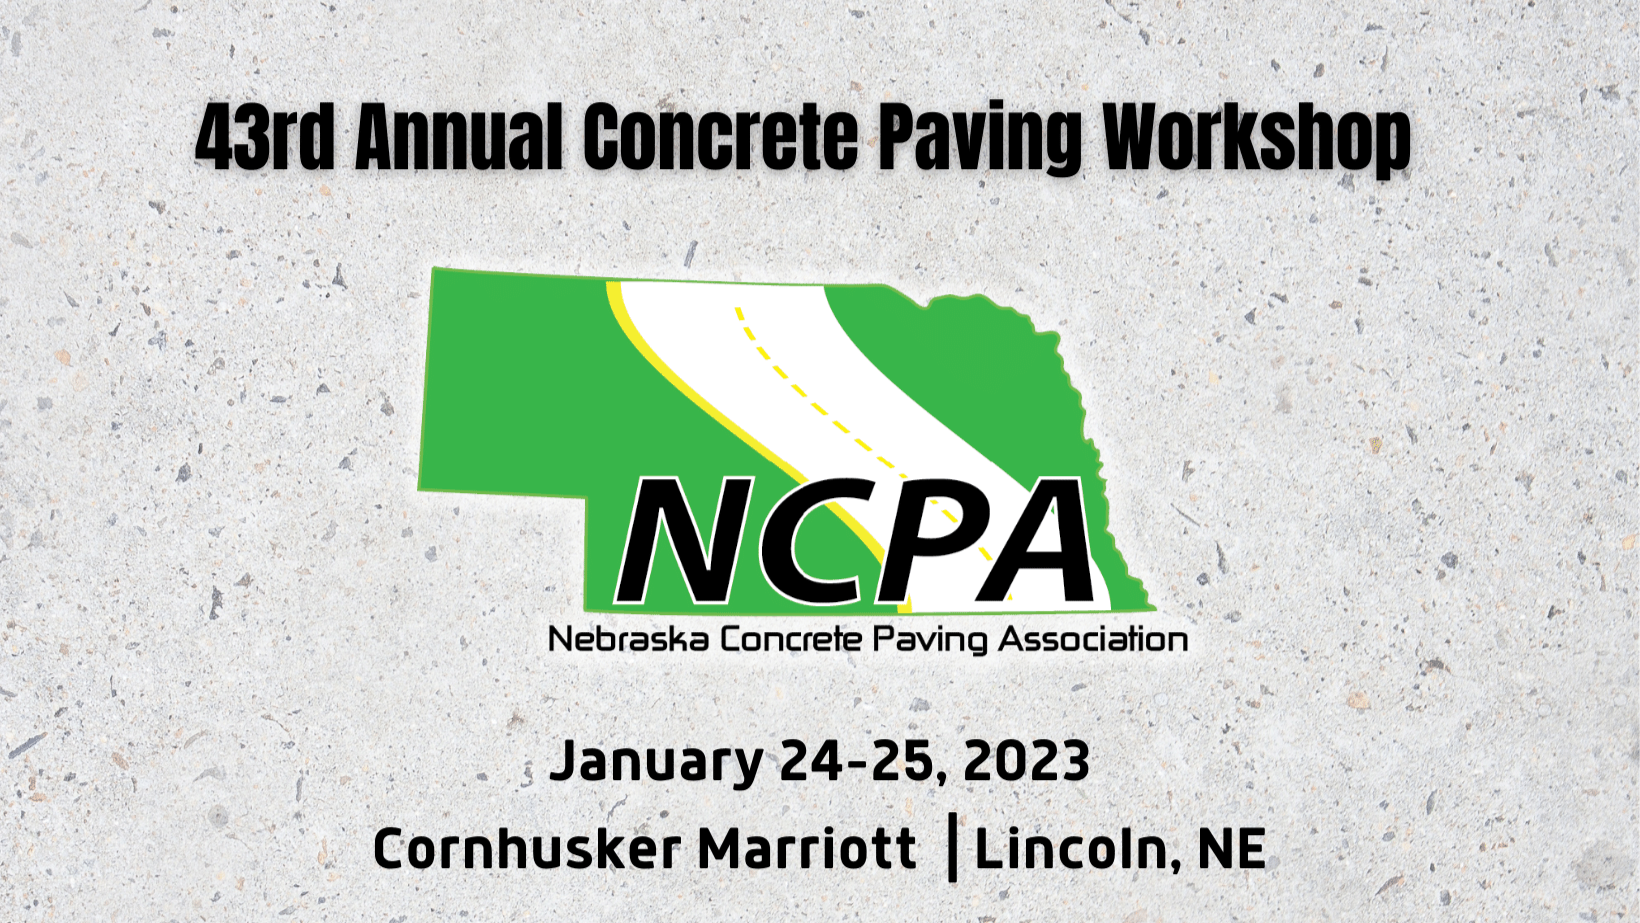 Join us at the 43rd Annual Nebraska Concrete Paving Workshop January 24-25, 2023 in Lincoln.